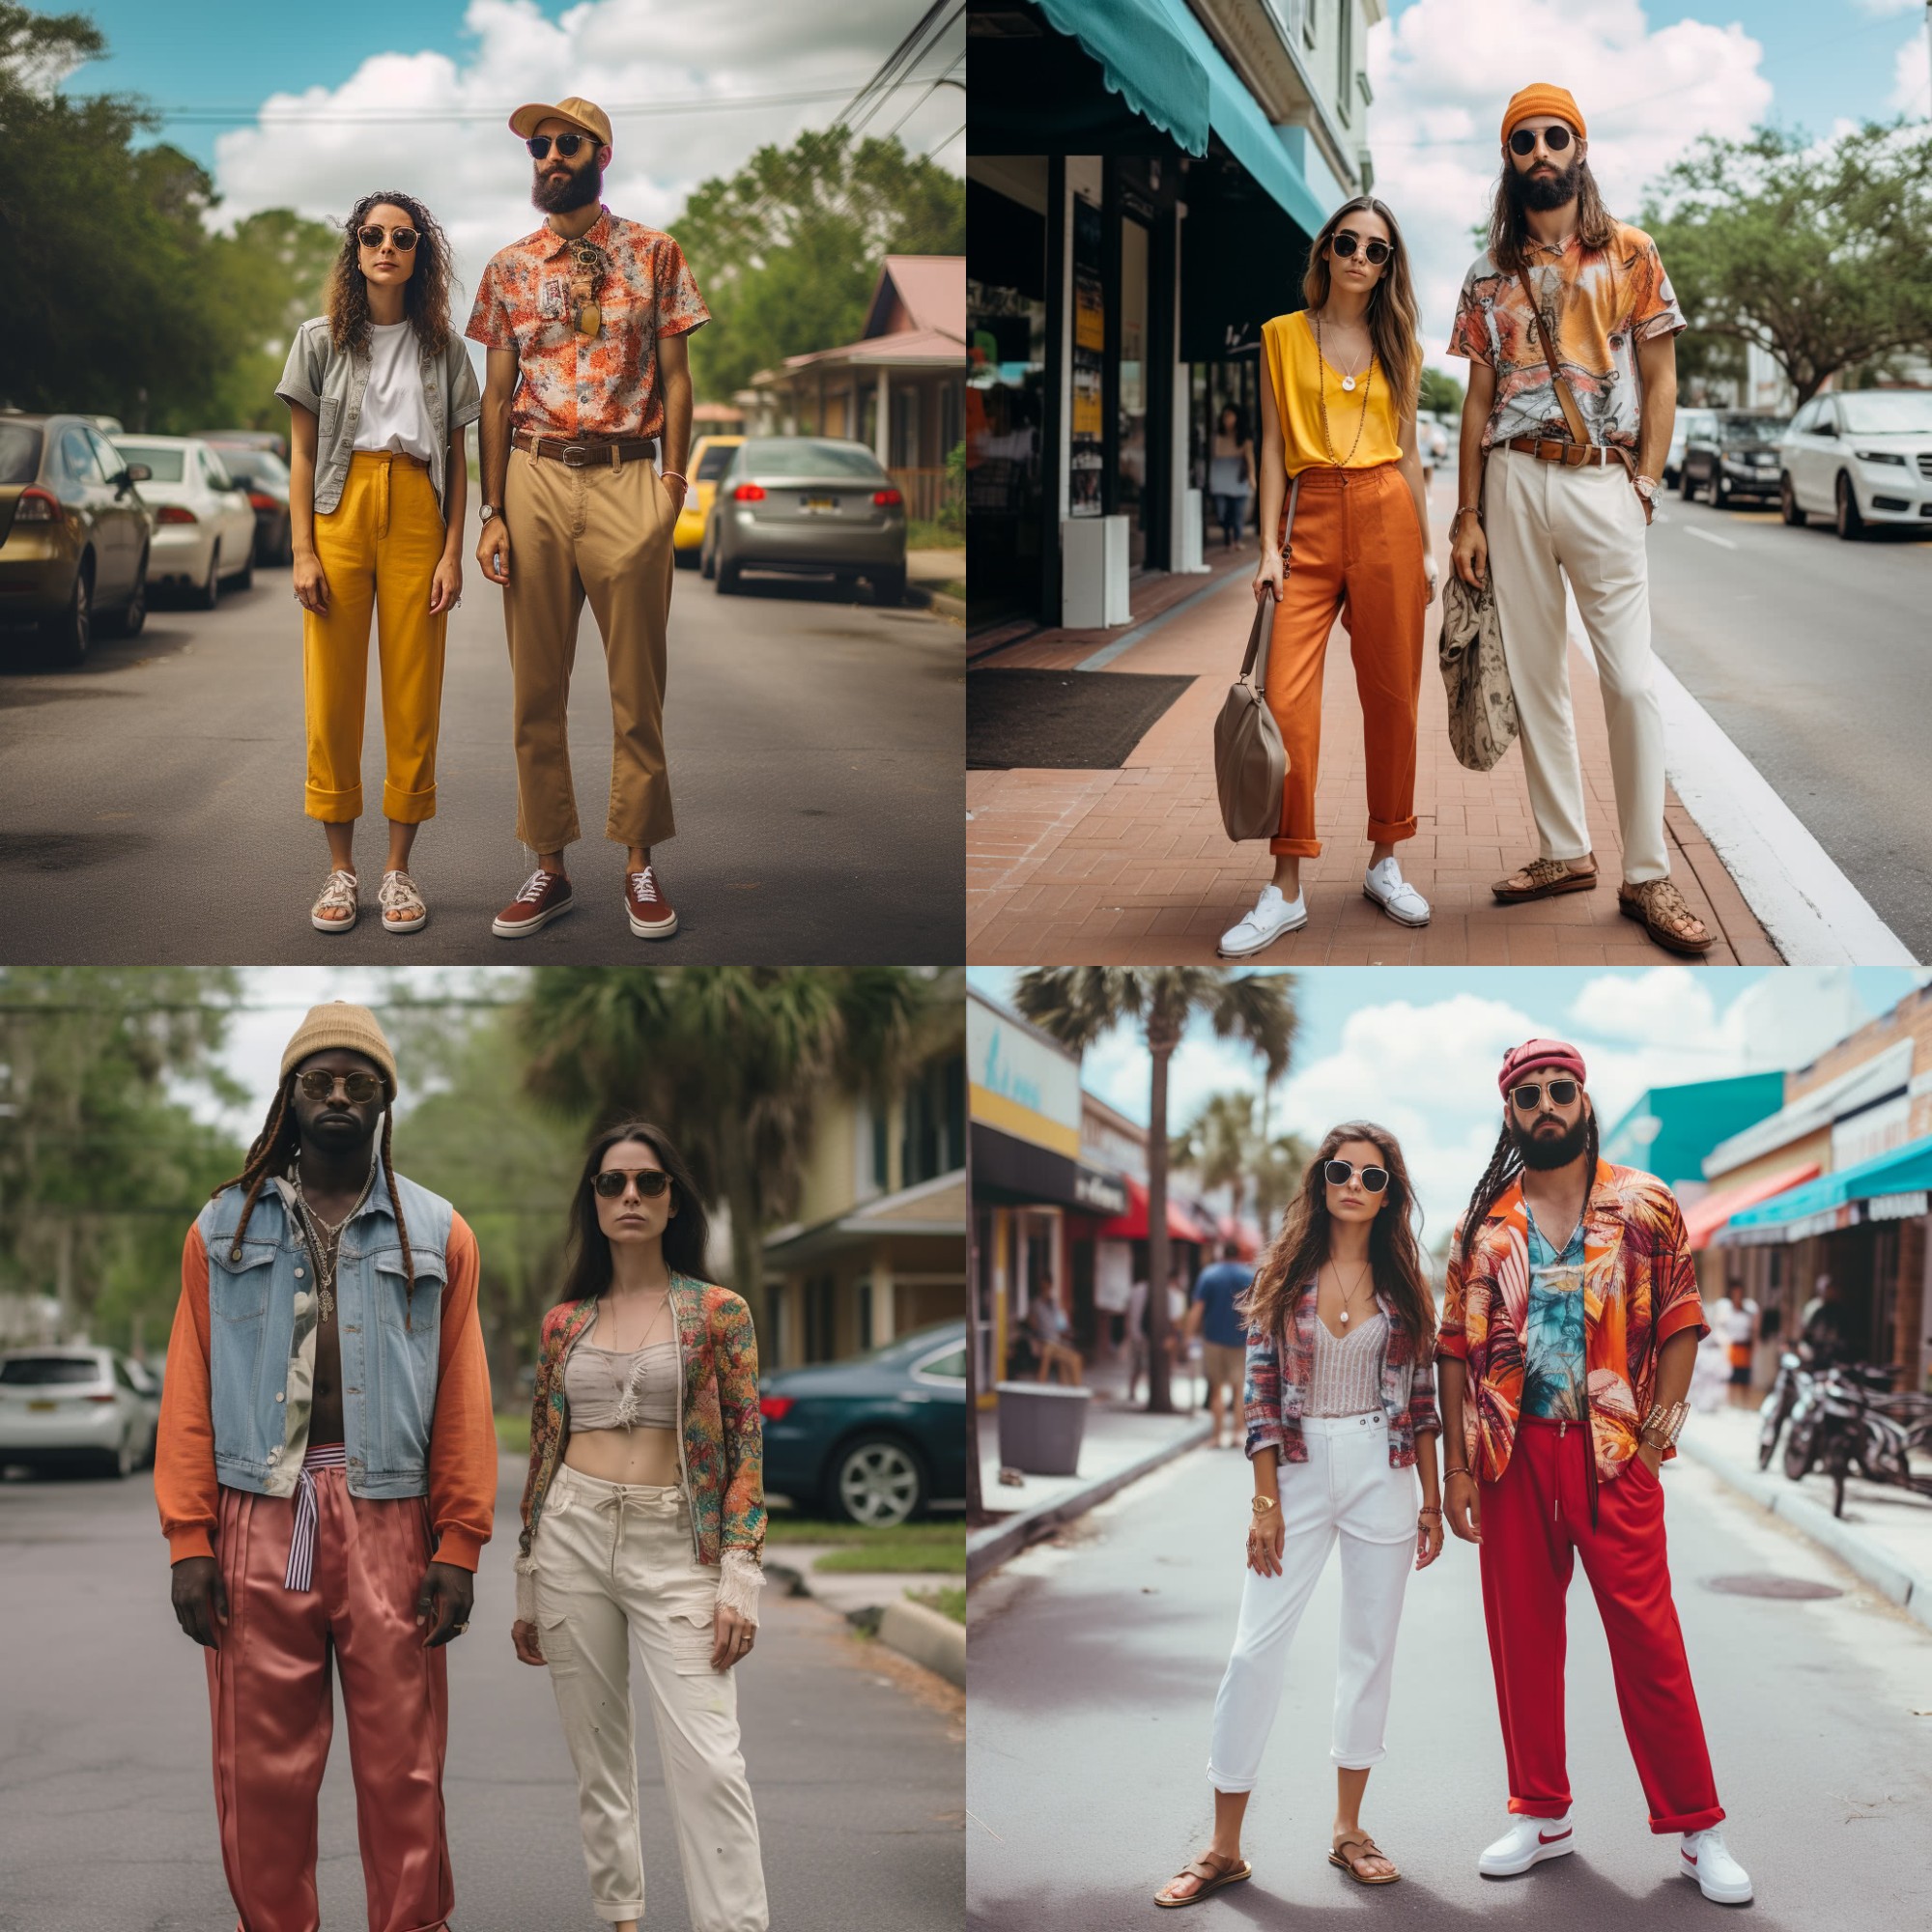 AI curated images of the average fashion style of individuals in Florida